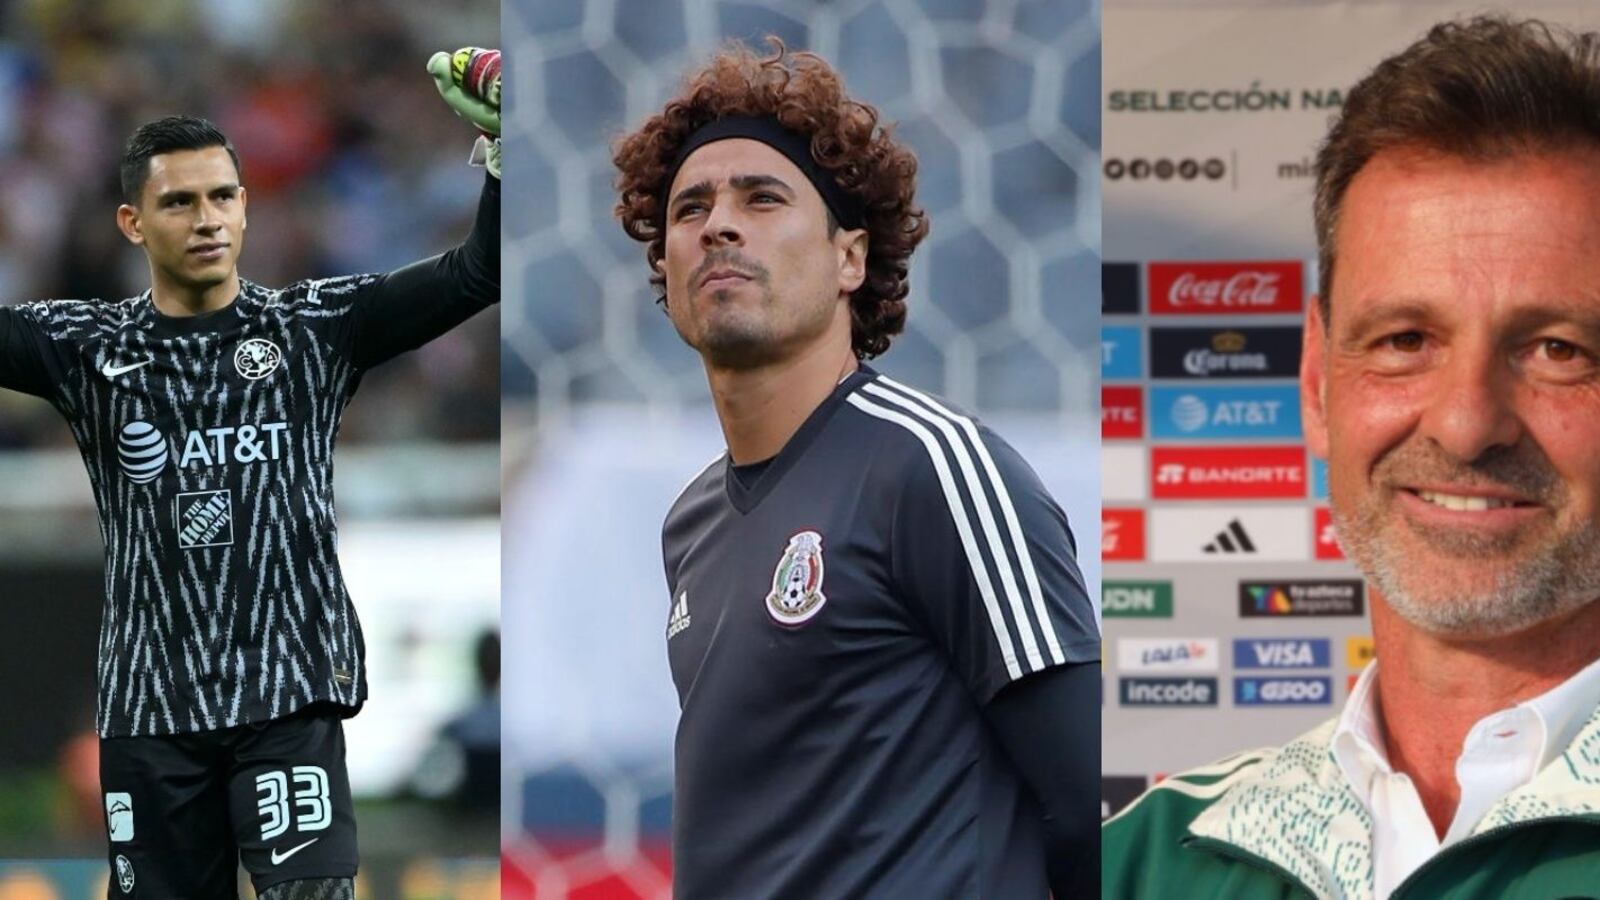 The bad news that Luis Malagón has just given Guillermo Ochoa, Cocca smiles